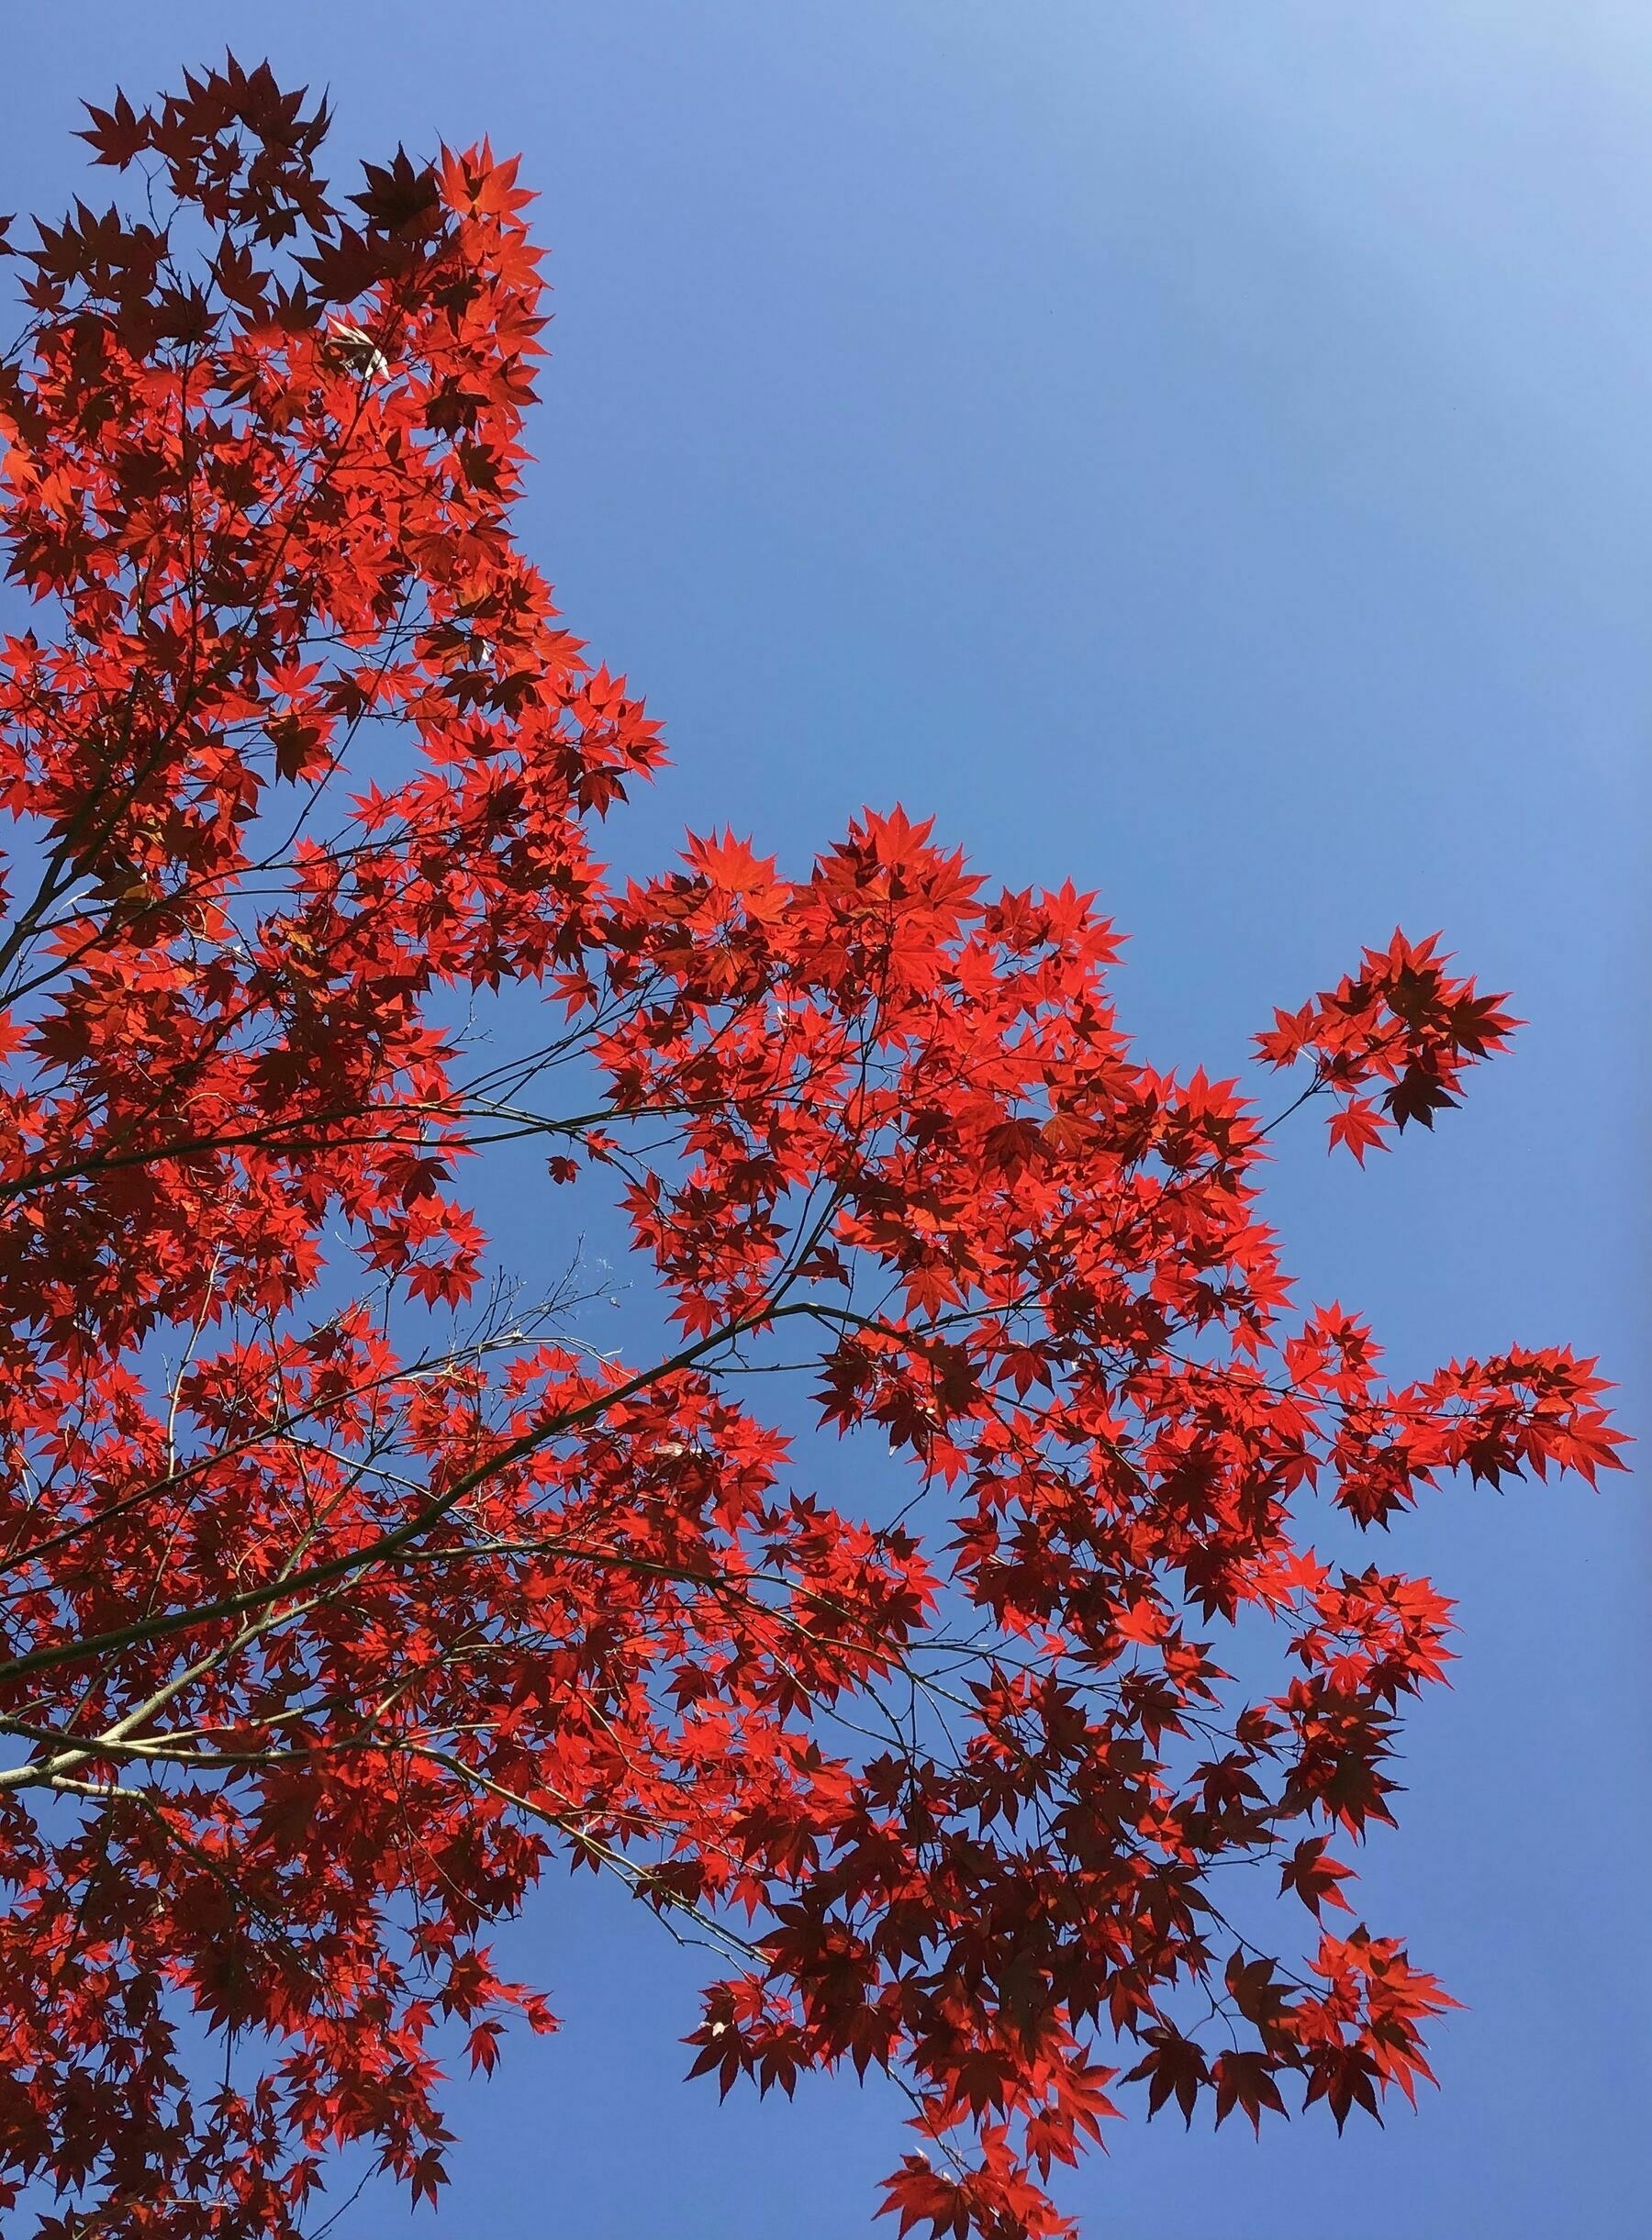 red foliage of a Japanese Maple tree pictured against a blue summer sky.